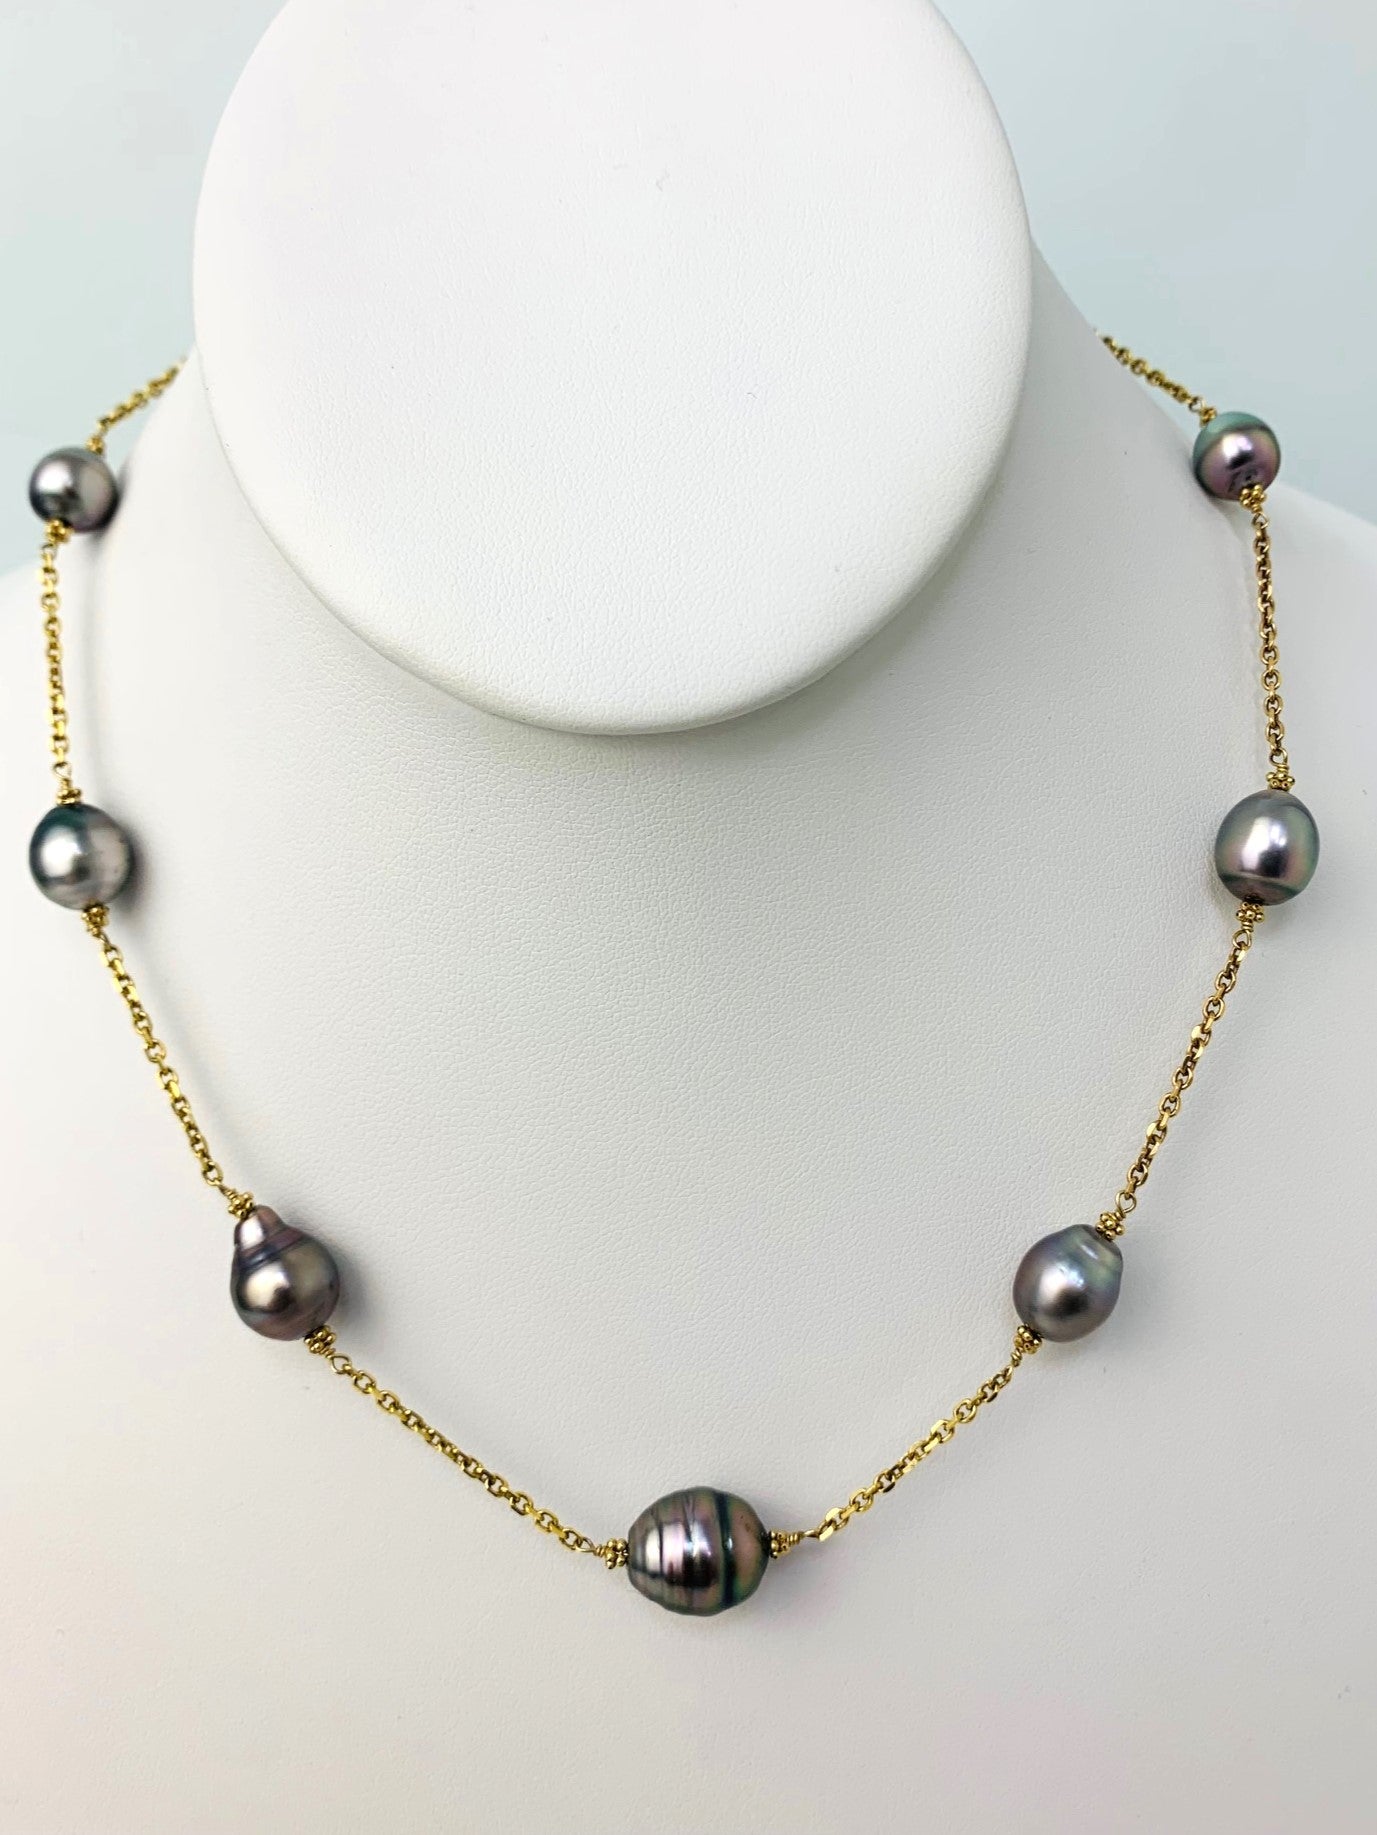 17" South Sea Pearl Station Necklace in 14KY - NCK-193-TNCPRL14Y-GRY-17